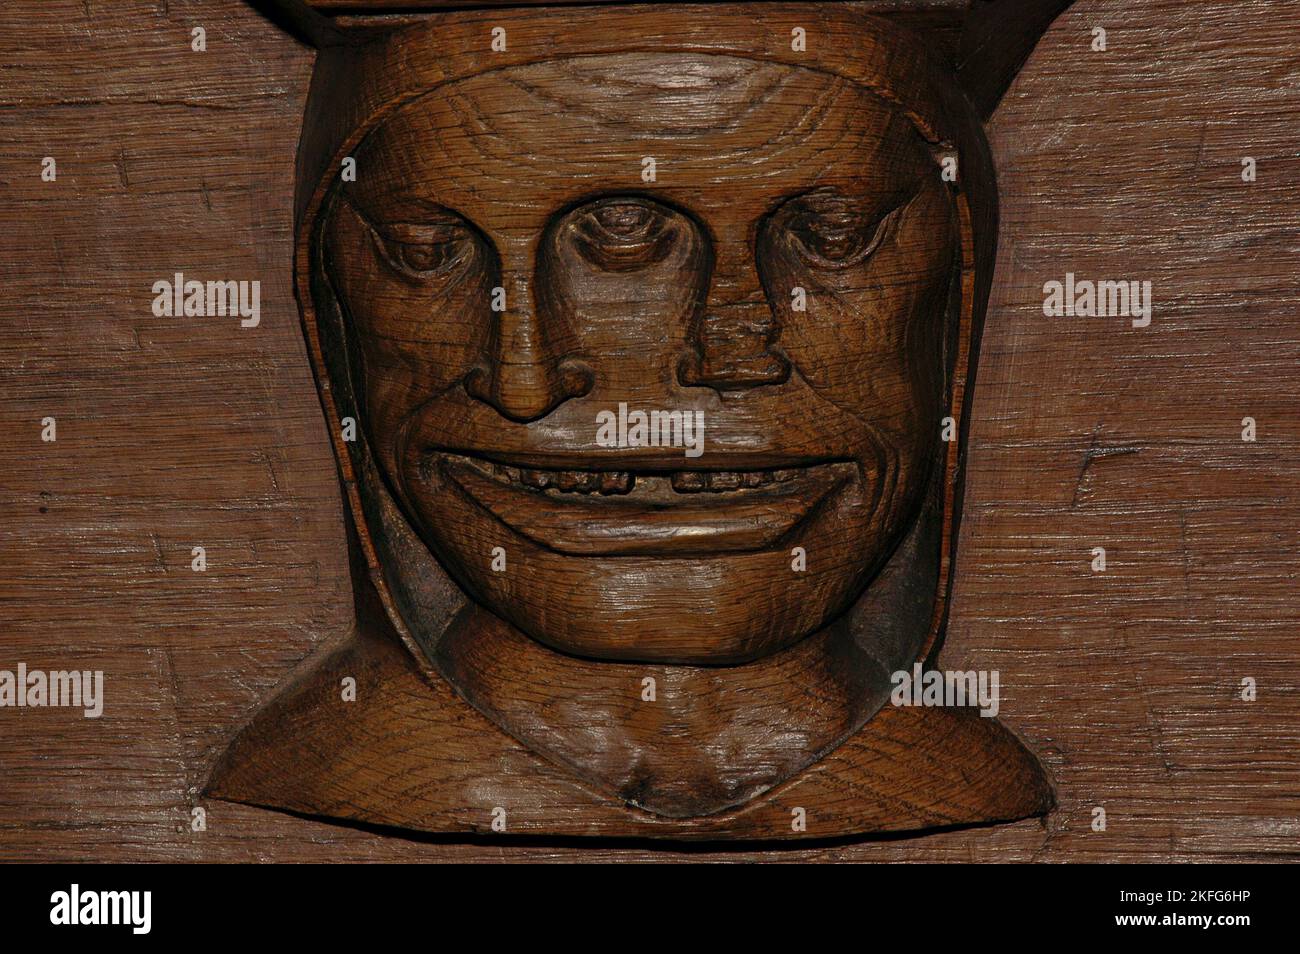 Hooded face with three eyes and two noses, believed to be a comment on how drunken people tend to agree with each other about everything.  Late 1400s sculpted misericord beneath choir stall seat in the Oude Kerk (Old Church) in Ouderkerksplein, Amsterdam, Netherlands. Stock Photo